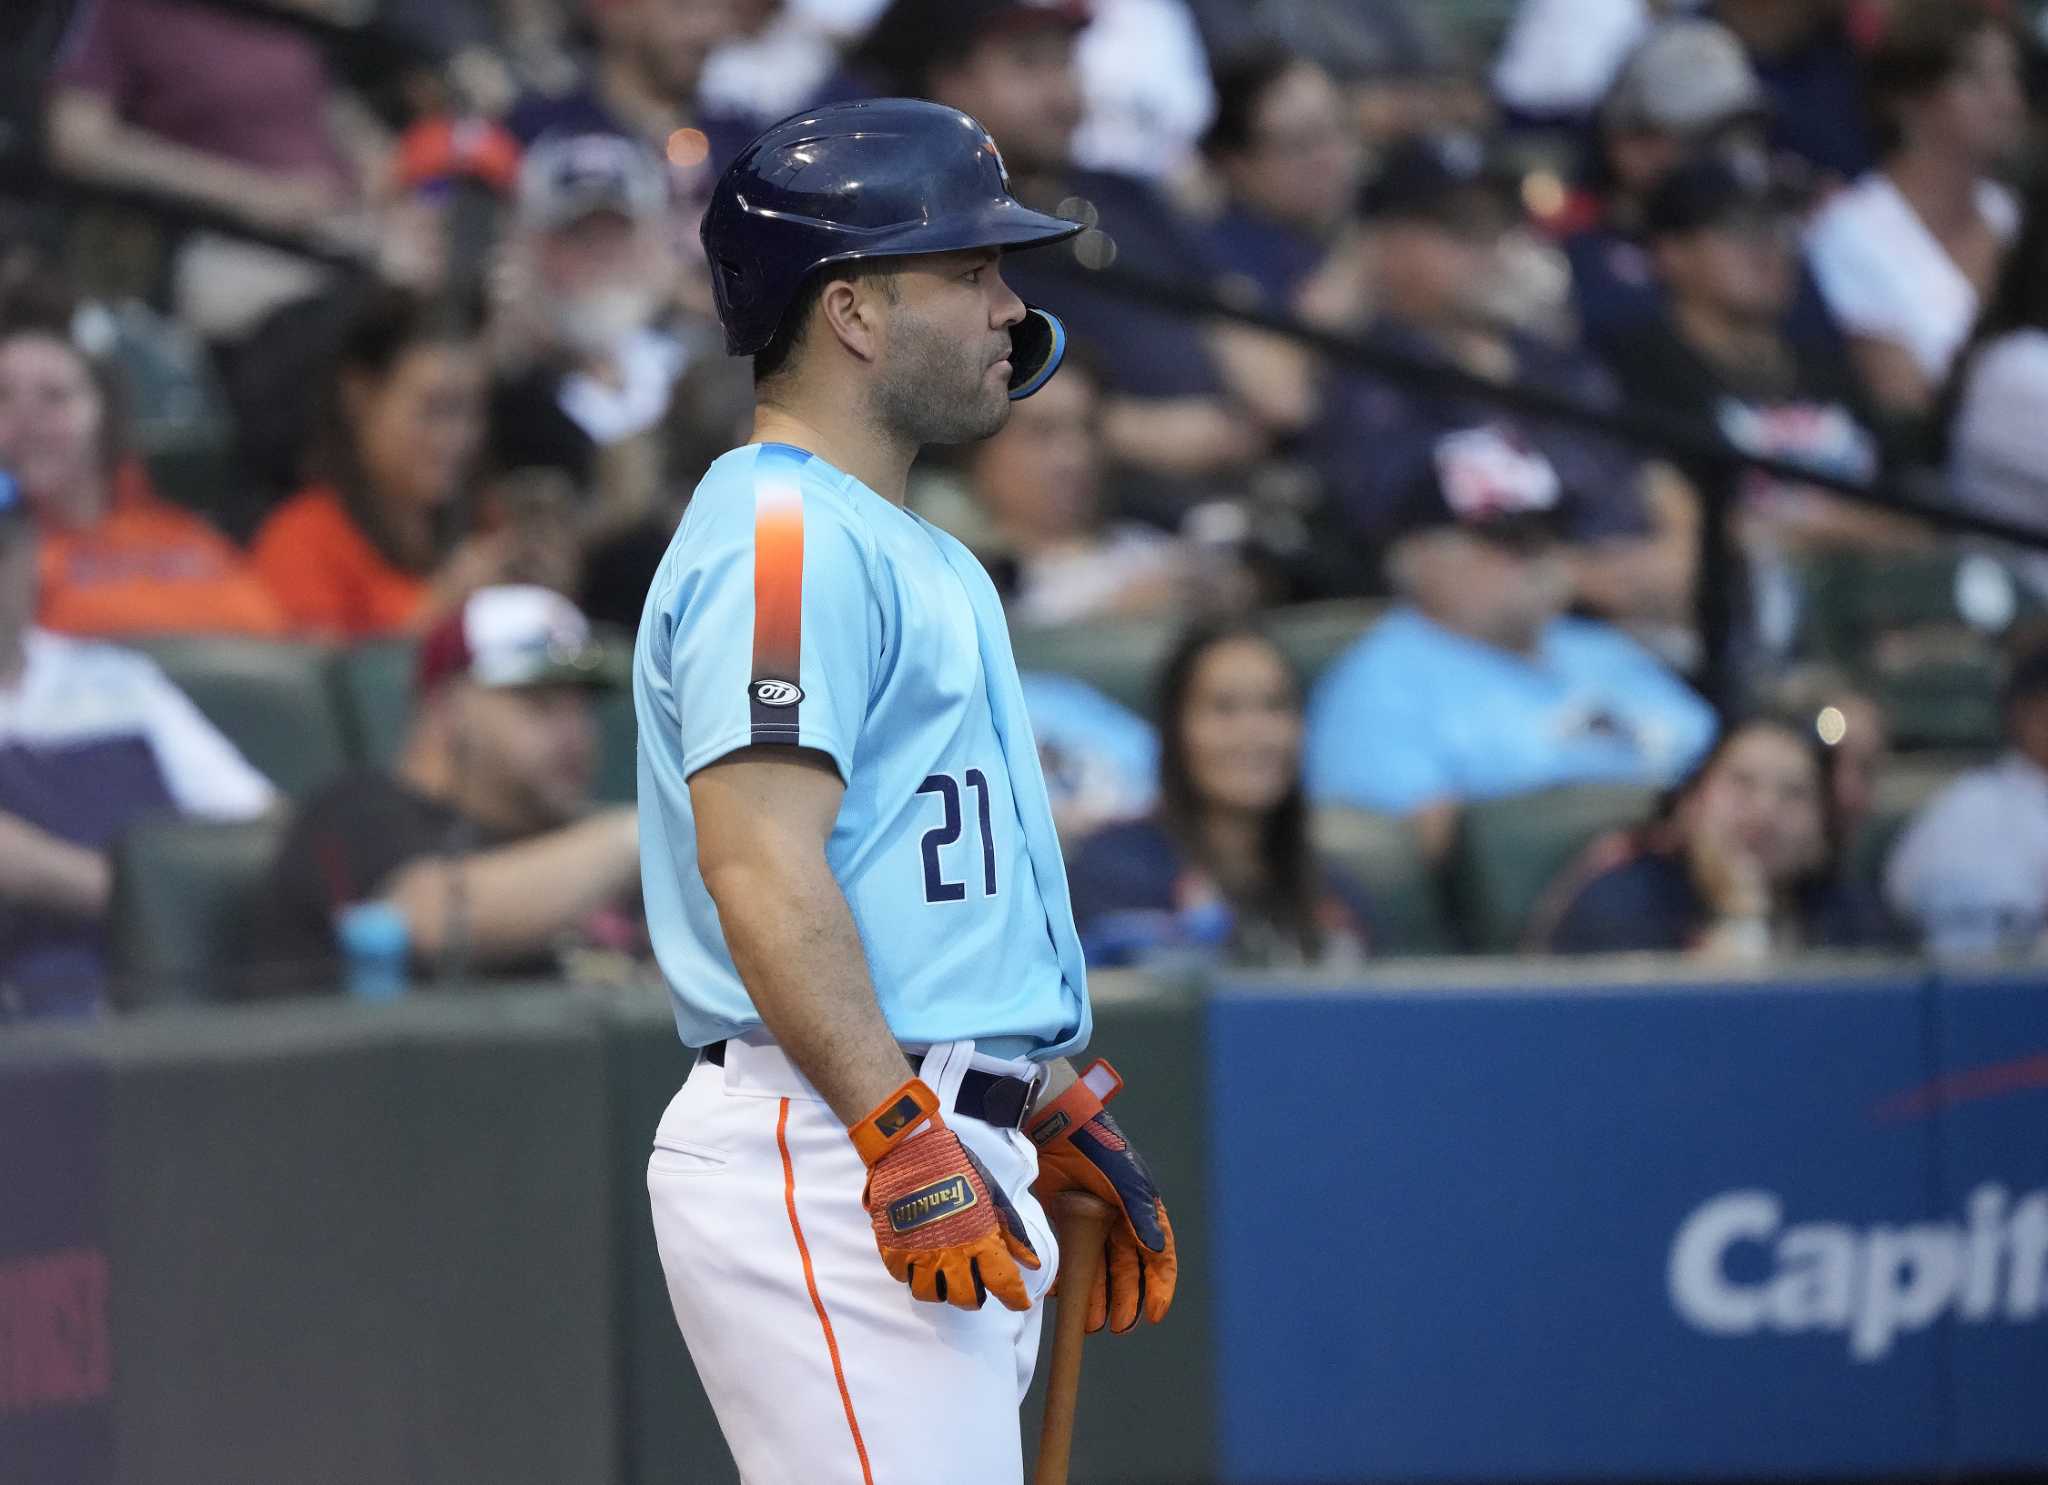 Astros' Jose Altuve says he's 'really close' to returning from injury